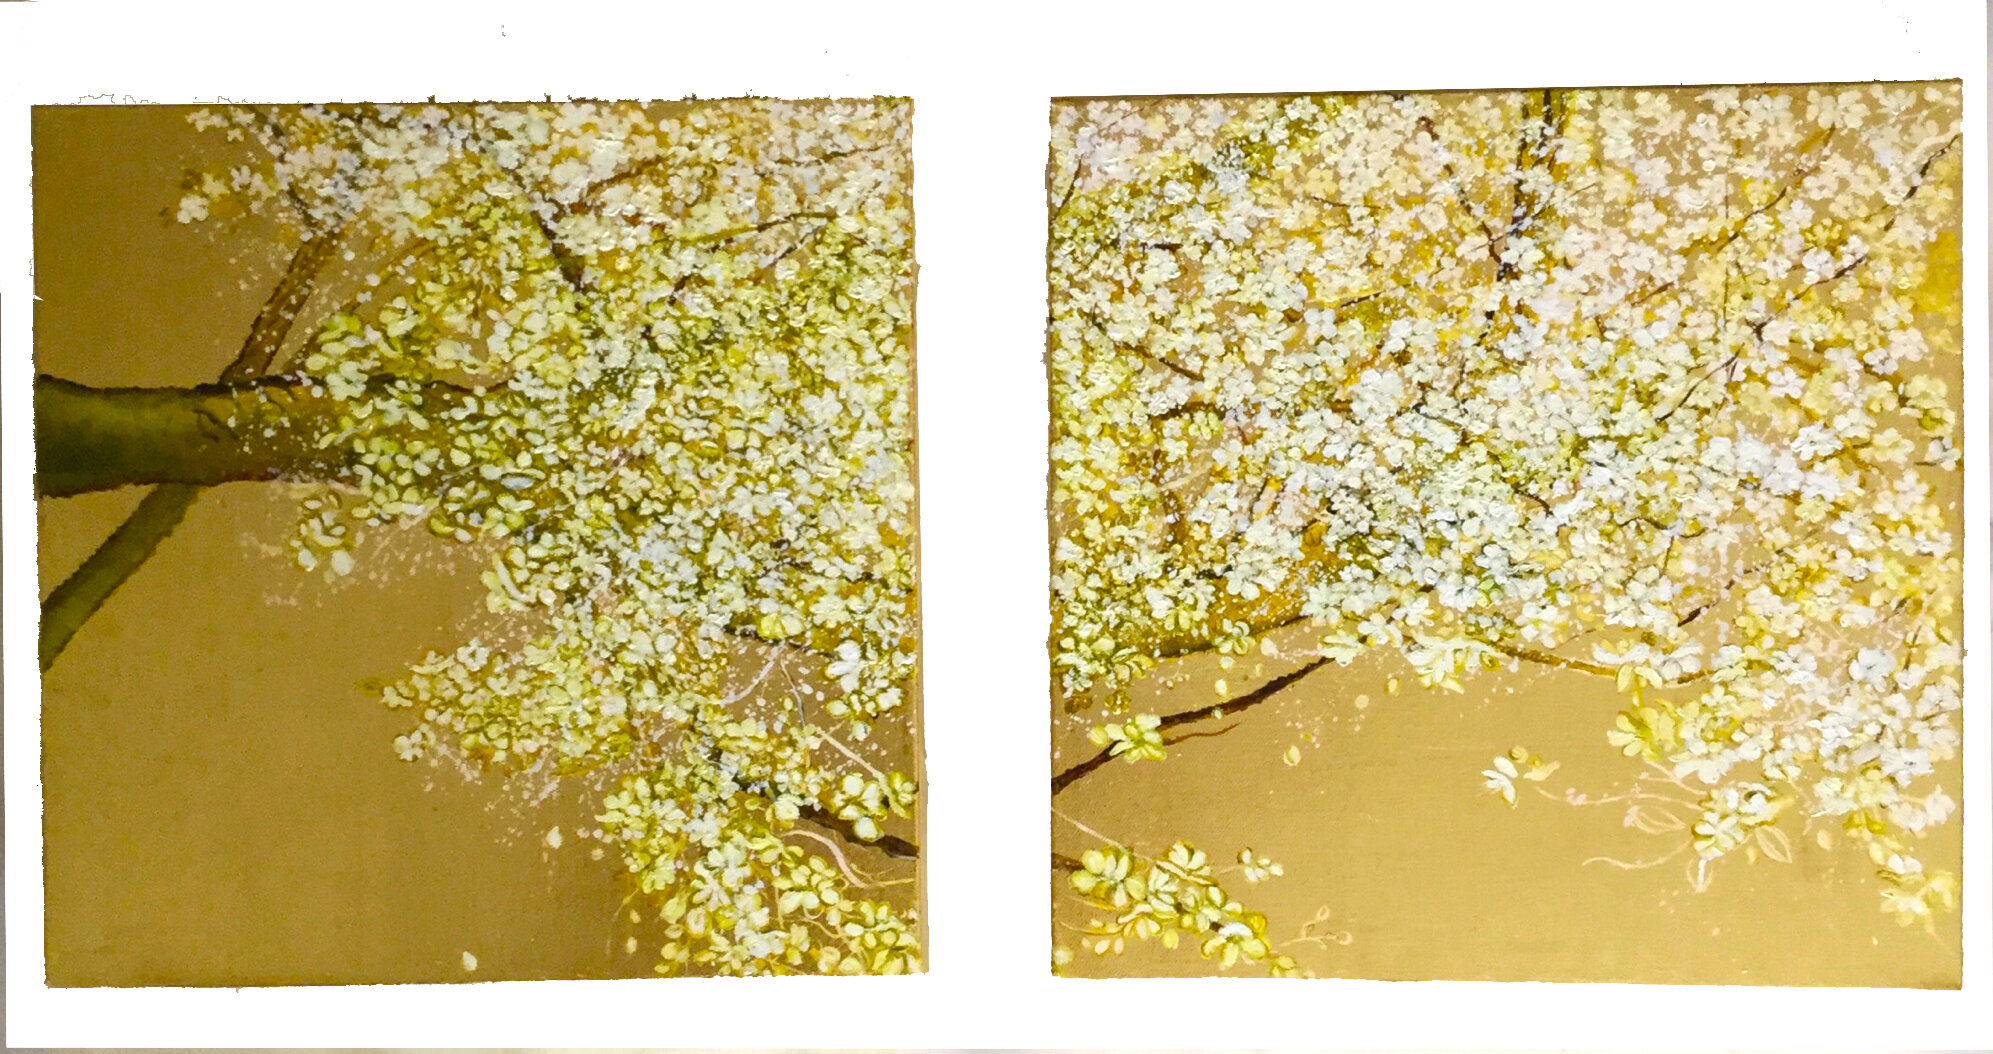  Anastasia Gklava - Call Me Sweetheart - Oil and gold leaf on canvas - Dim: 16 x 31.5 in / 40 x 80 cm (diptych) 